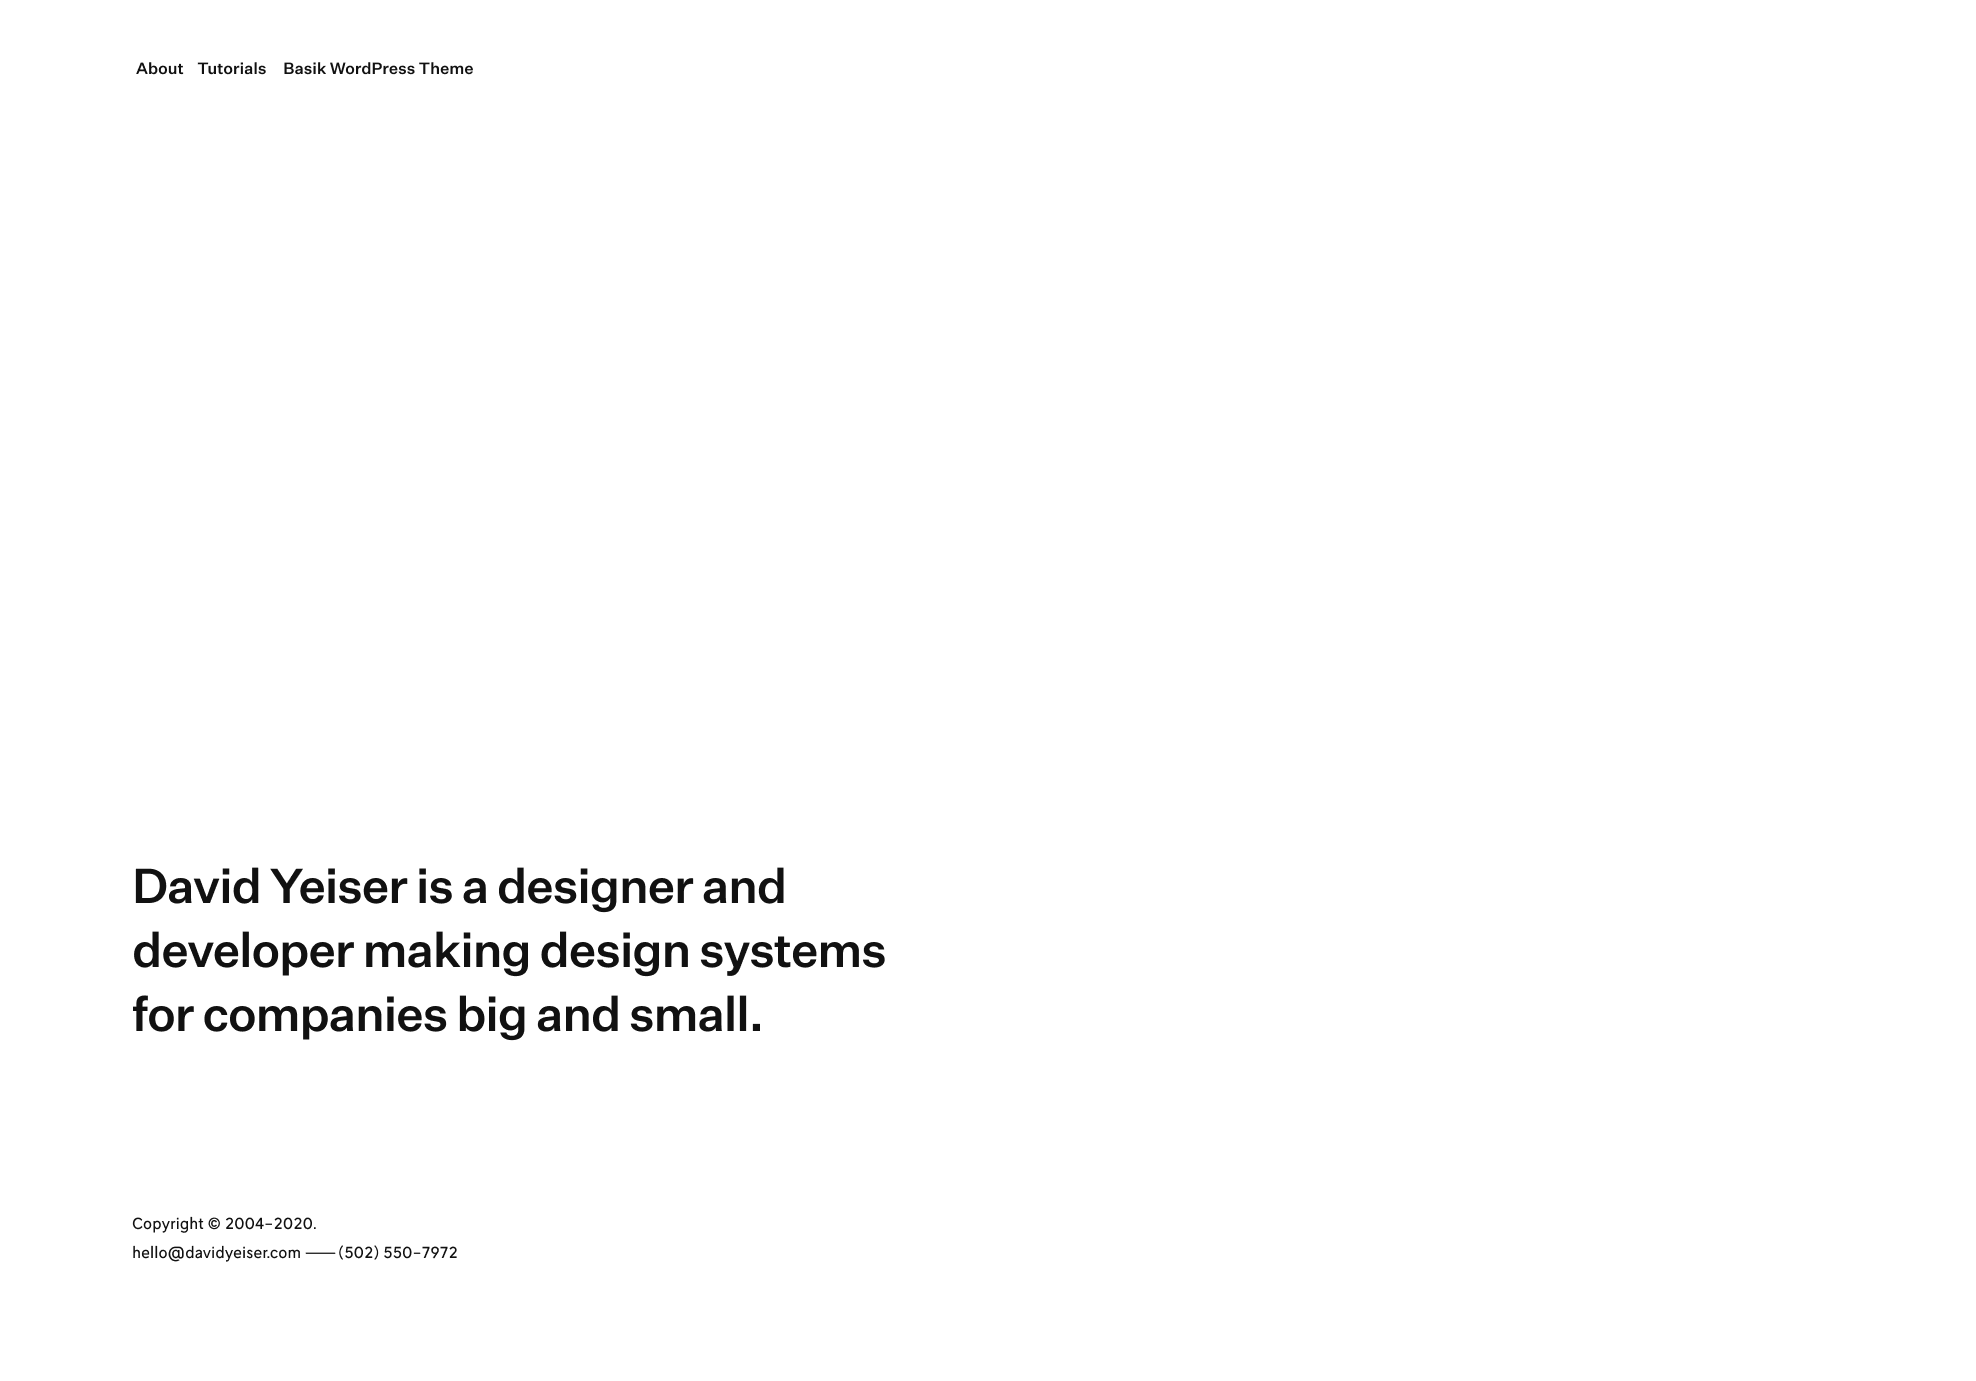 Main headline typeset in a medium weight sans set in the bottom left of the page with a simple header navigation at the top and a simple footer with copyright and contact details at the bottom.